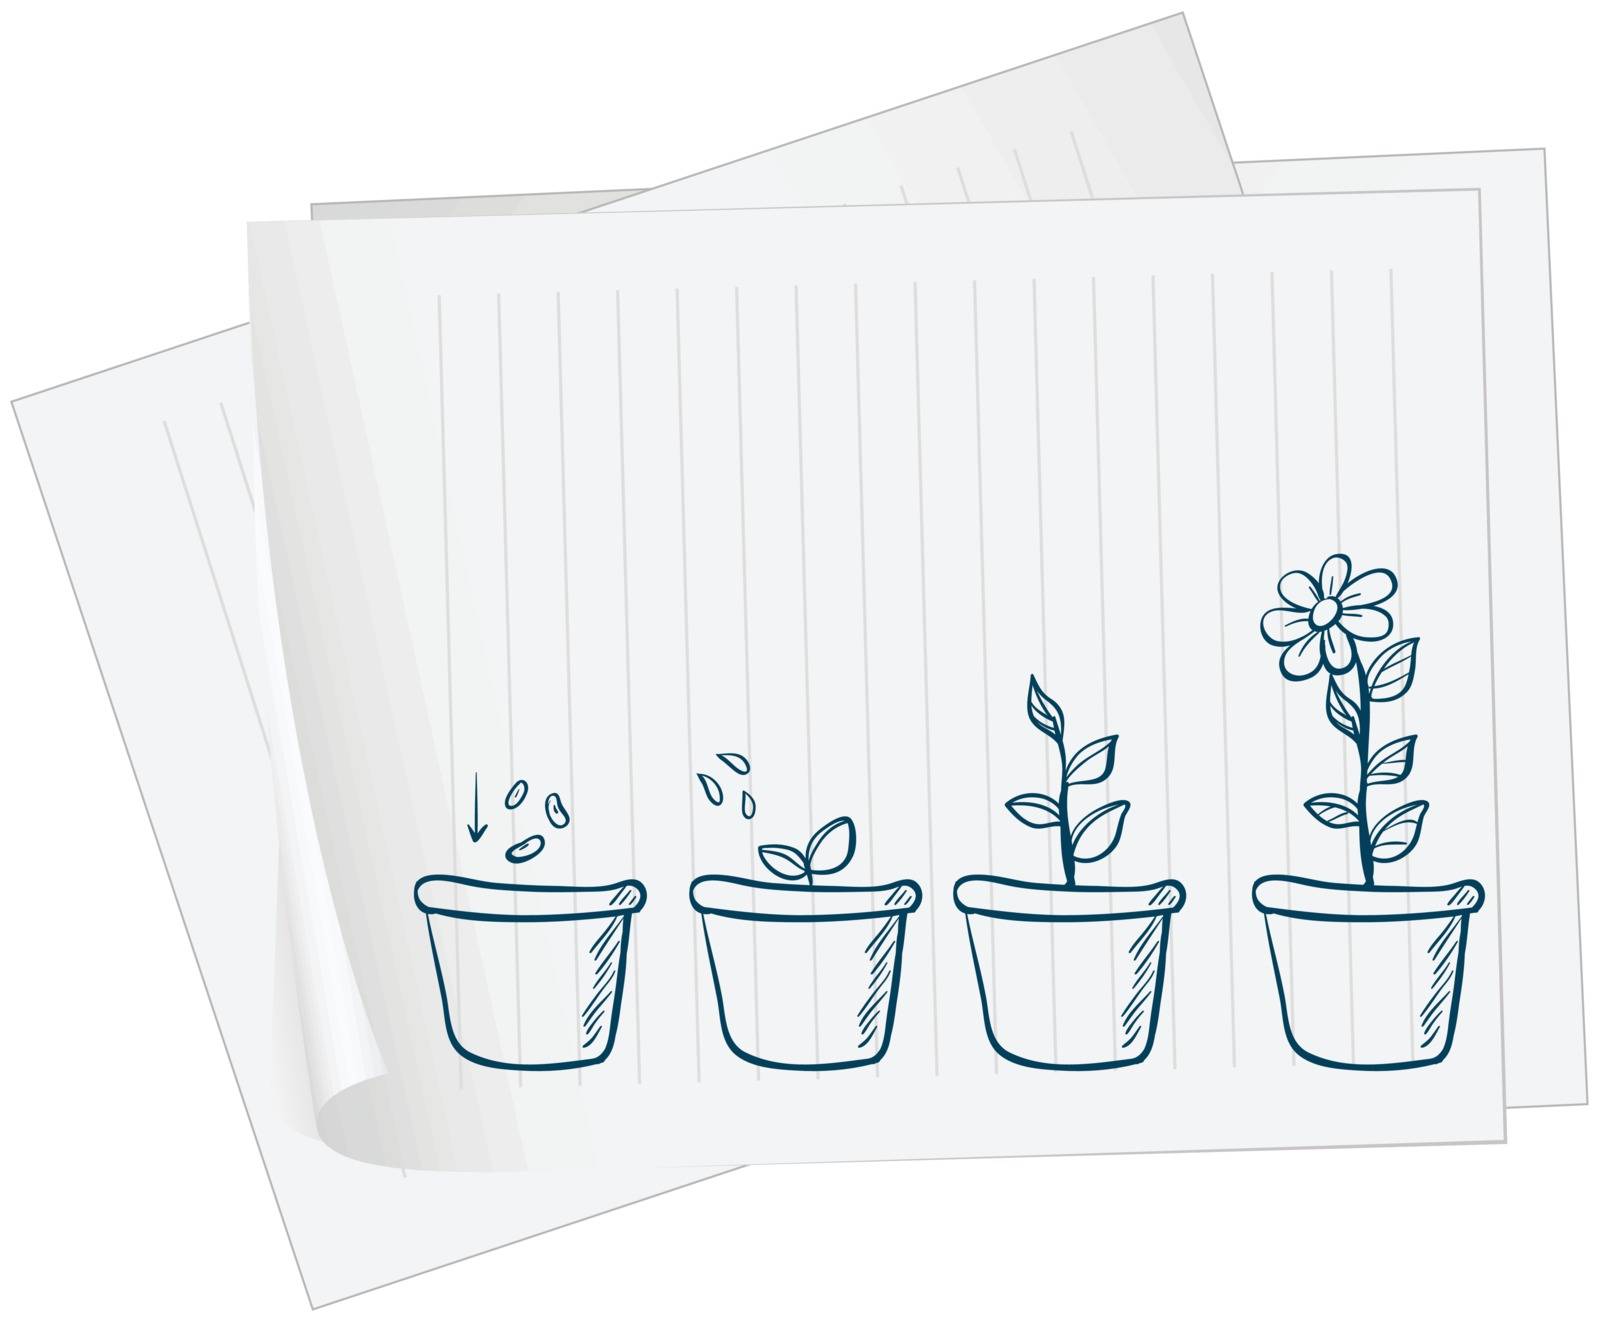 A paper with a drawing of a growing plant by iimages